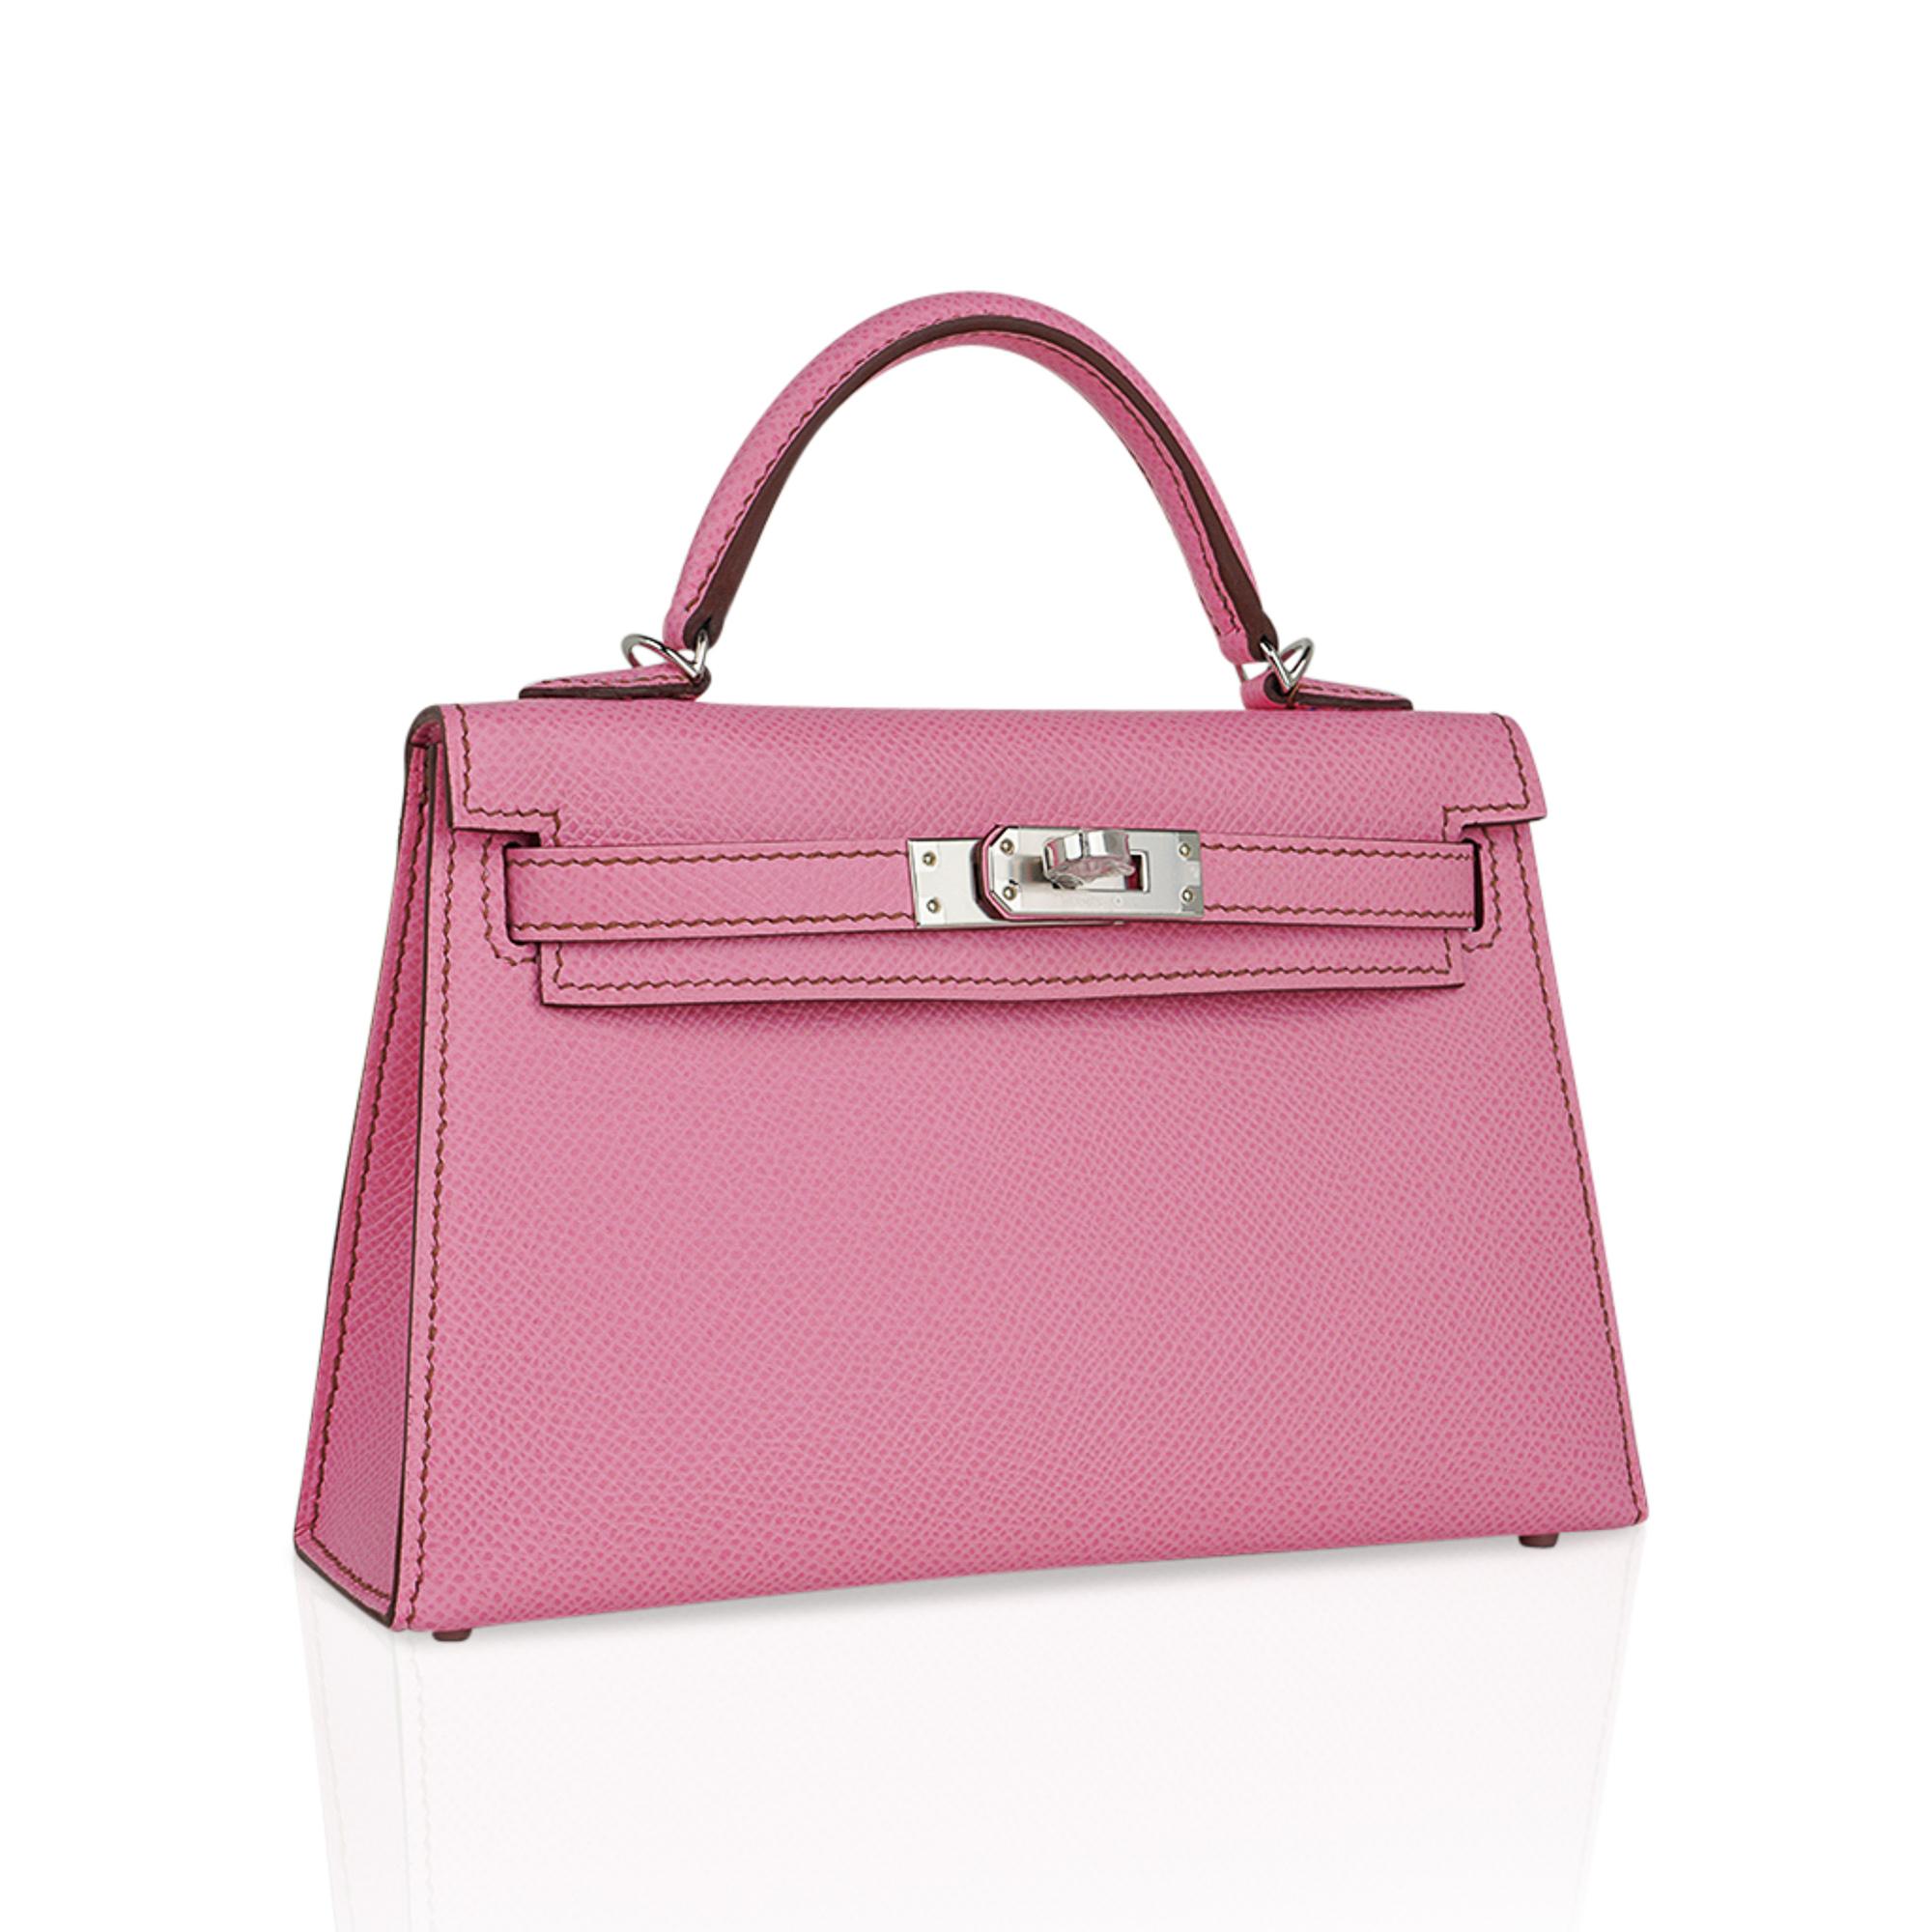 Mightychic offers an Hermes Kelly 20 Mini Sellier bag featured in coveted Bubblegum 5P Pink.  
If the Barbie moment shows us anything - it is the timeless classic of pink! 
Epsom leather accentuated with Palladium hardware.
Comes with signature